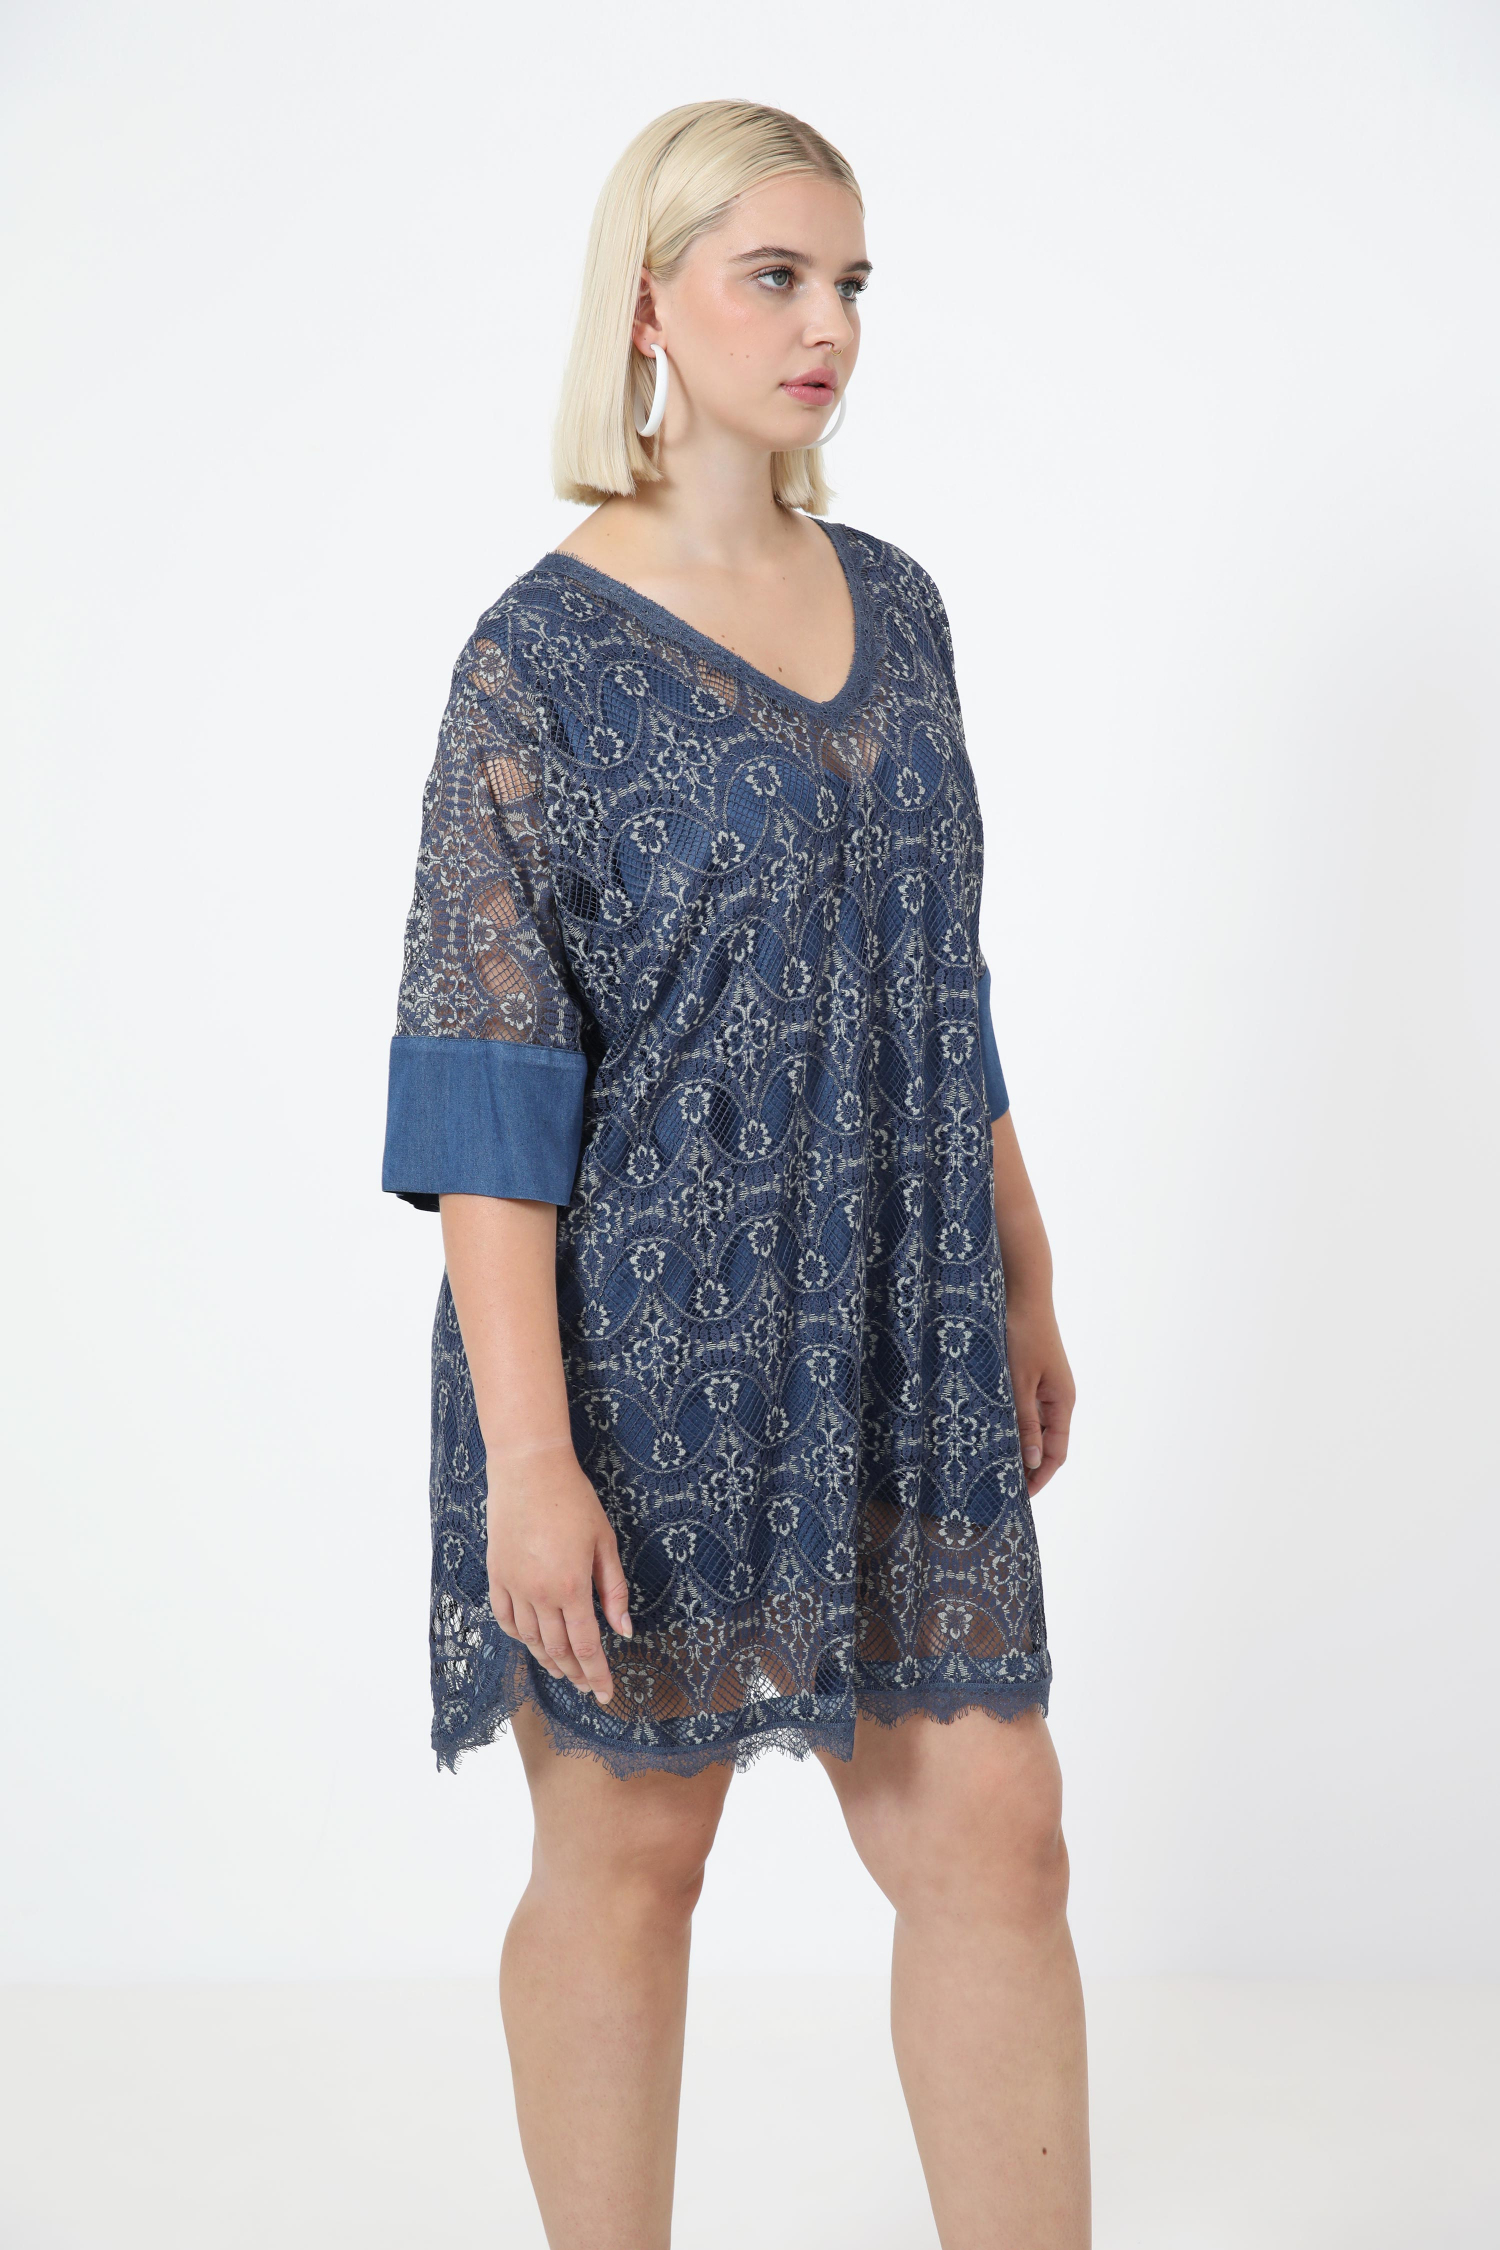 Mesh lace tunic with tank top